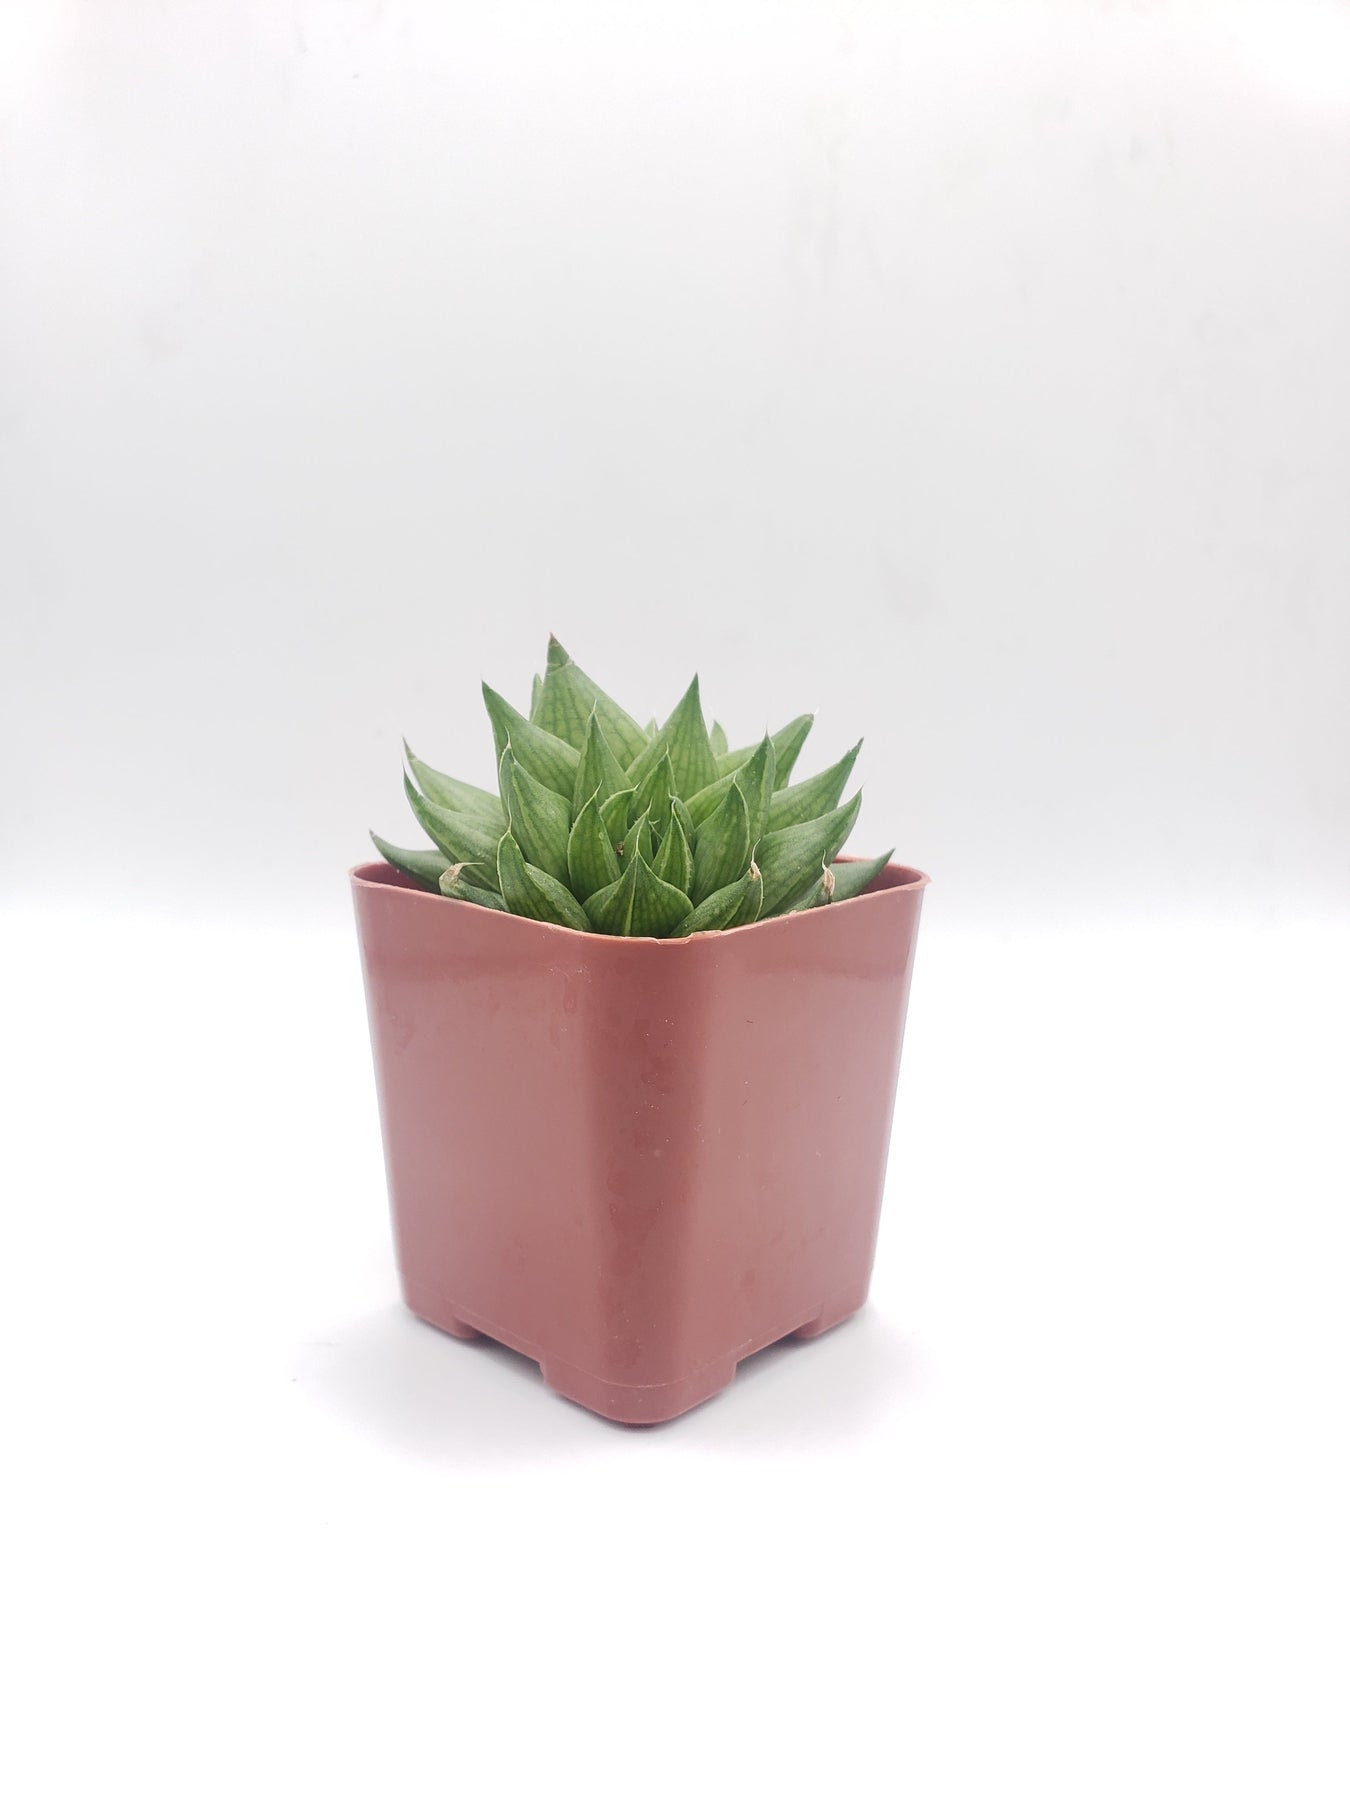 #96 Haworthia-Succulent - Small - Exact 2in Type-The Succulent Source